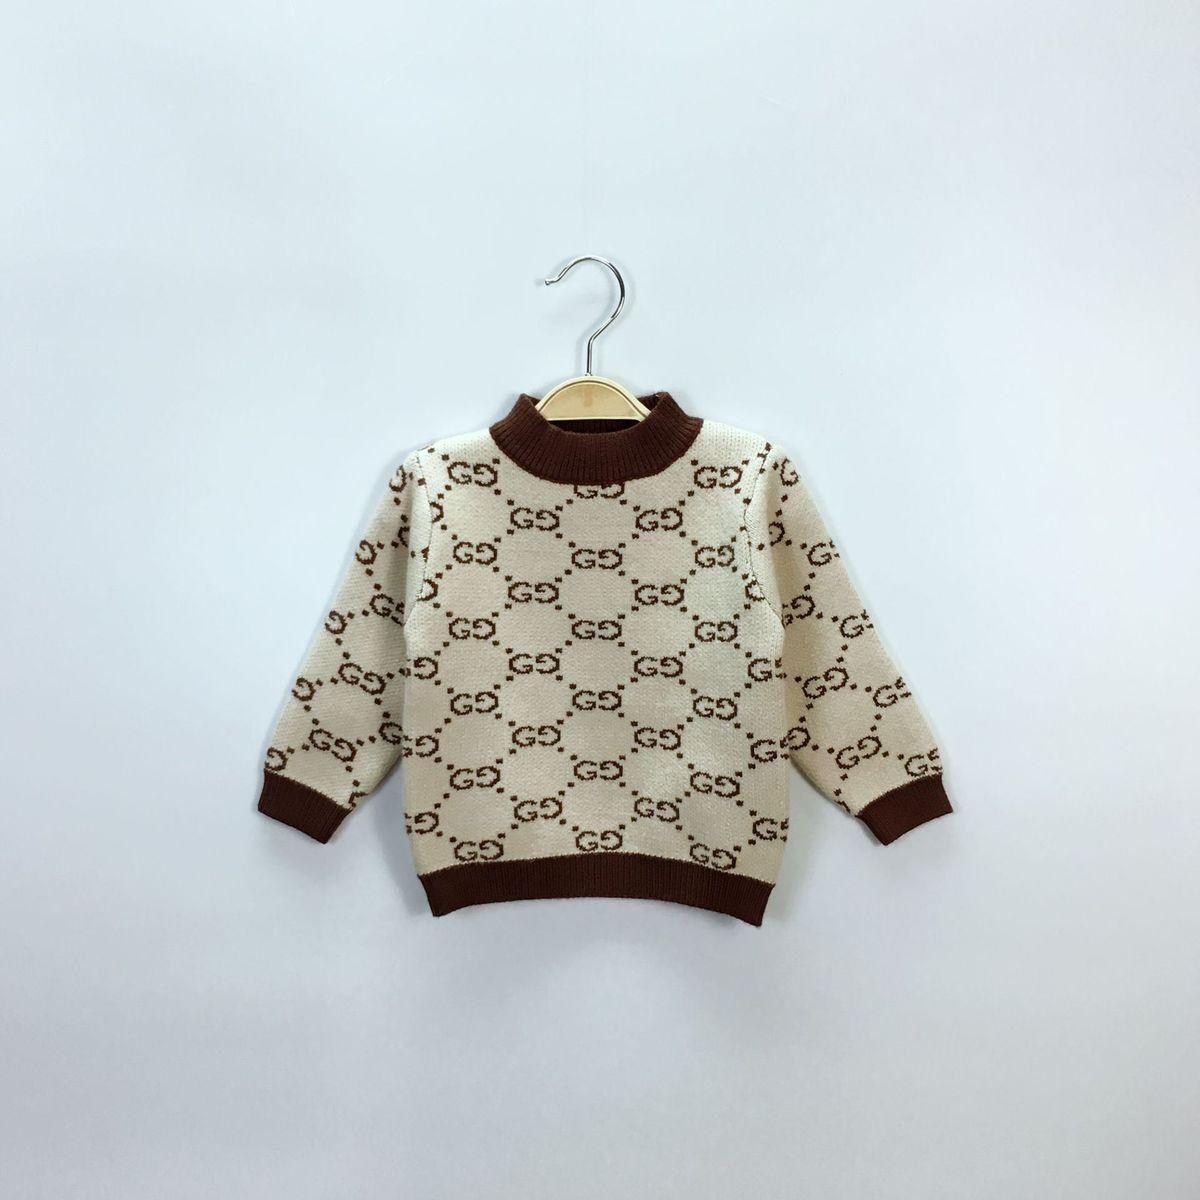 Knitted Childrens Sweaters Free Patterns Girl Sweater Korean Edition Autumn Jackets And Coats Winter For Double Letter Children Boys Knitting